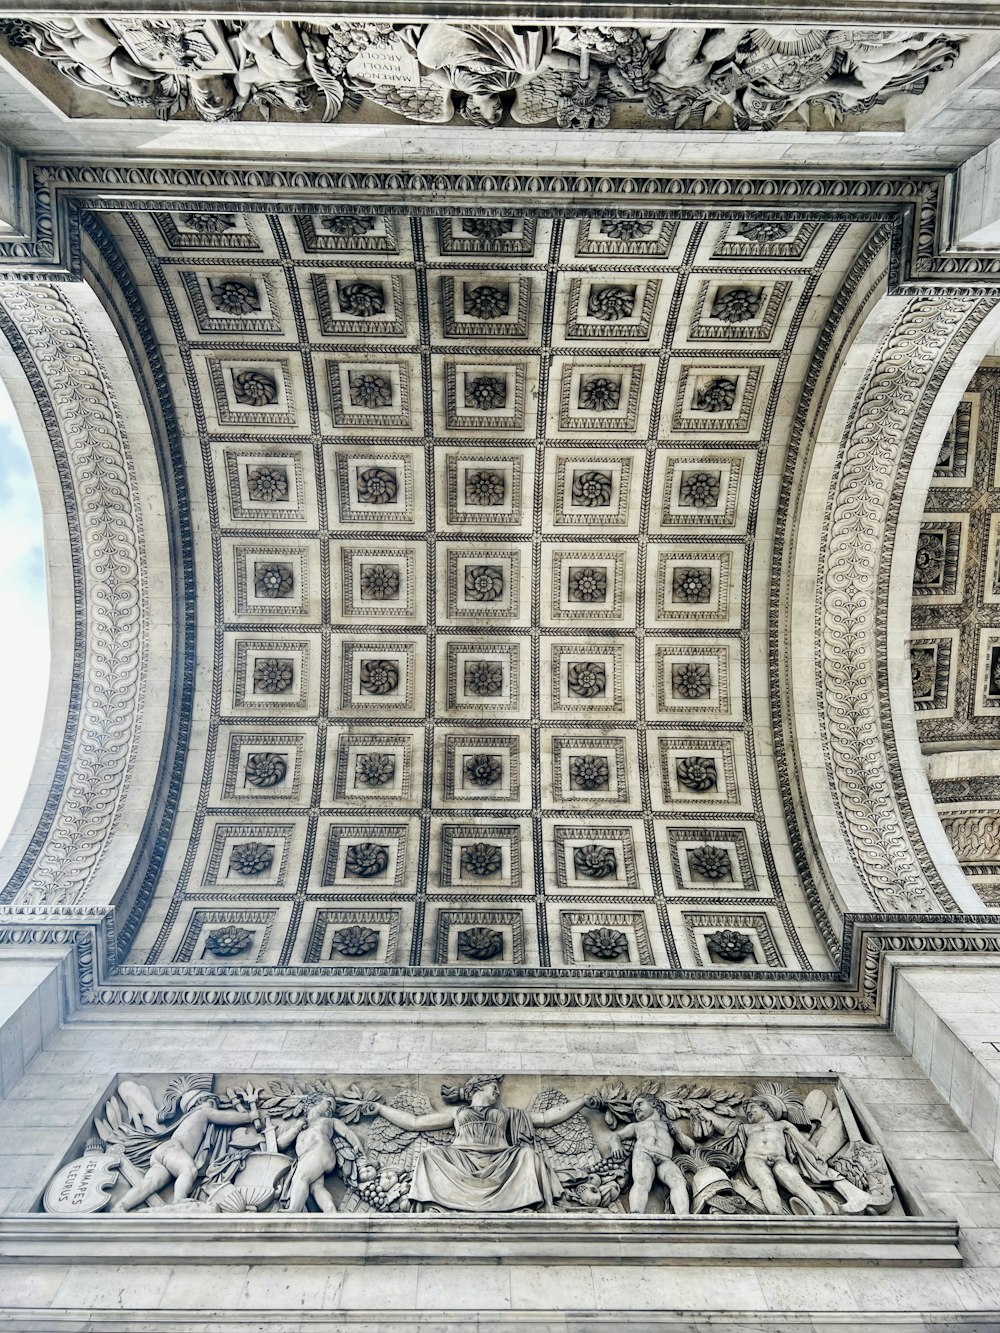 a close up of the ceiling of a building